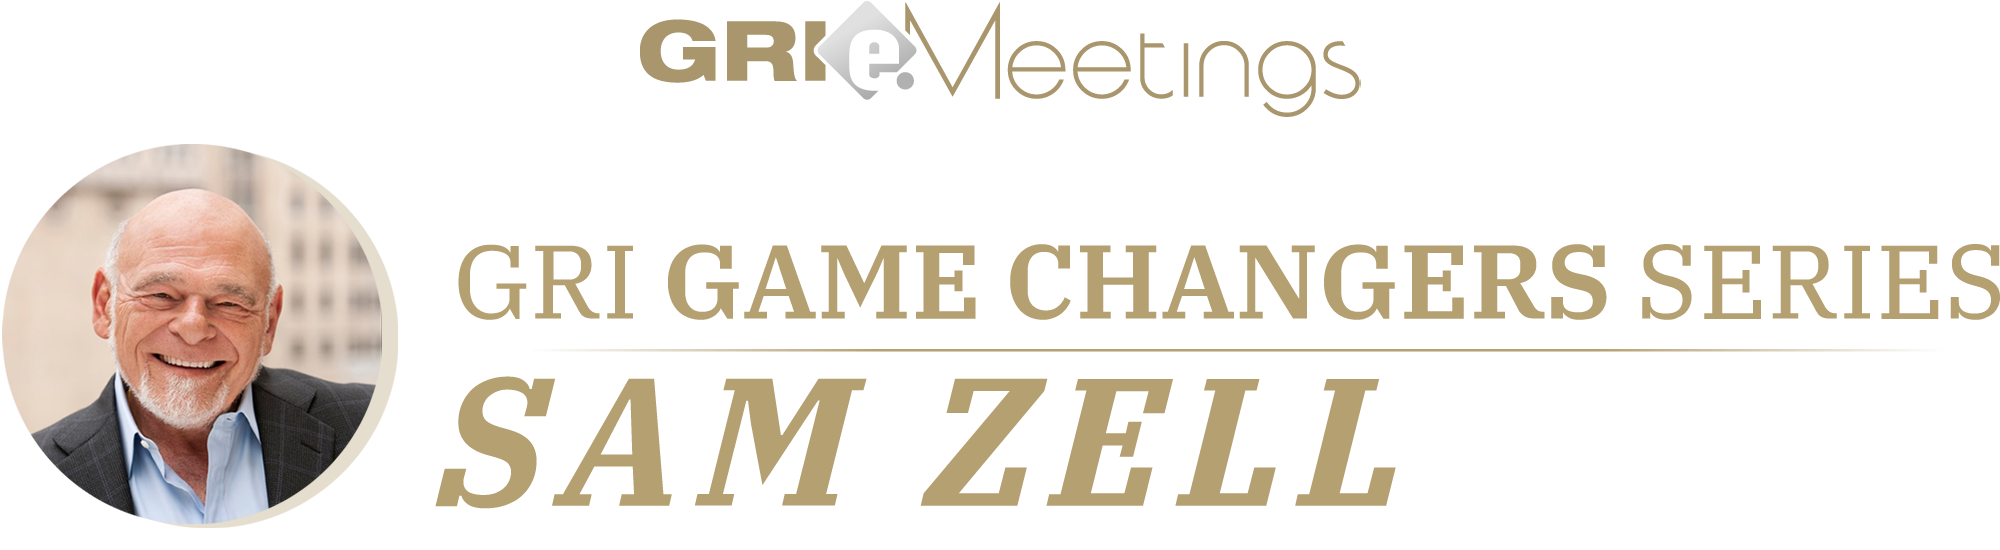 GRI Game Changers Series: Sam Zell